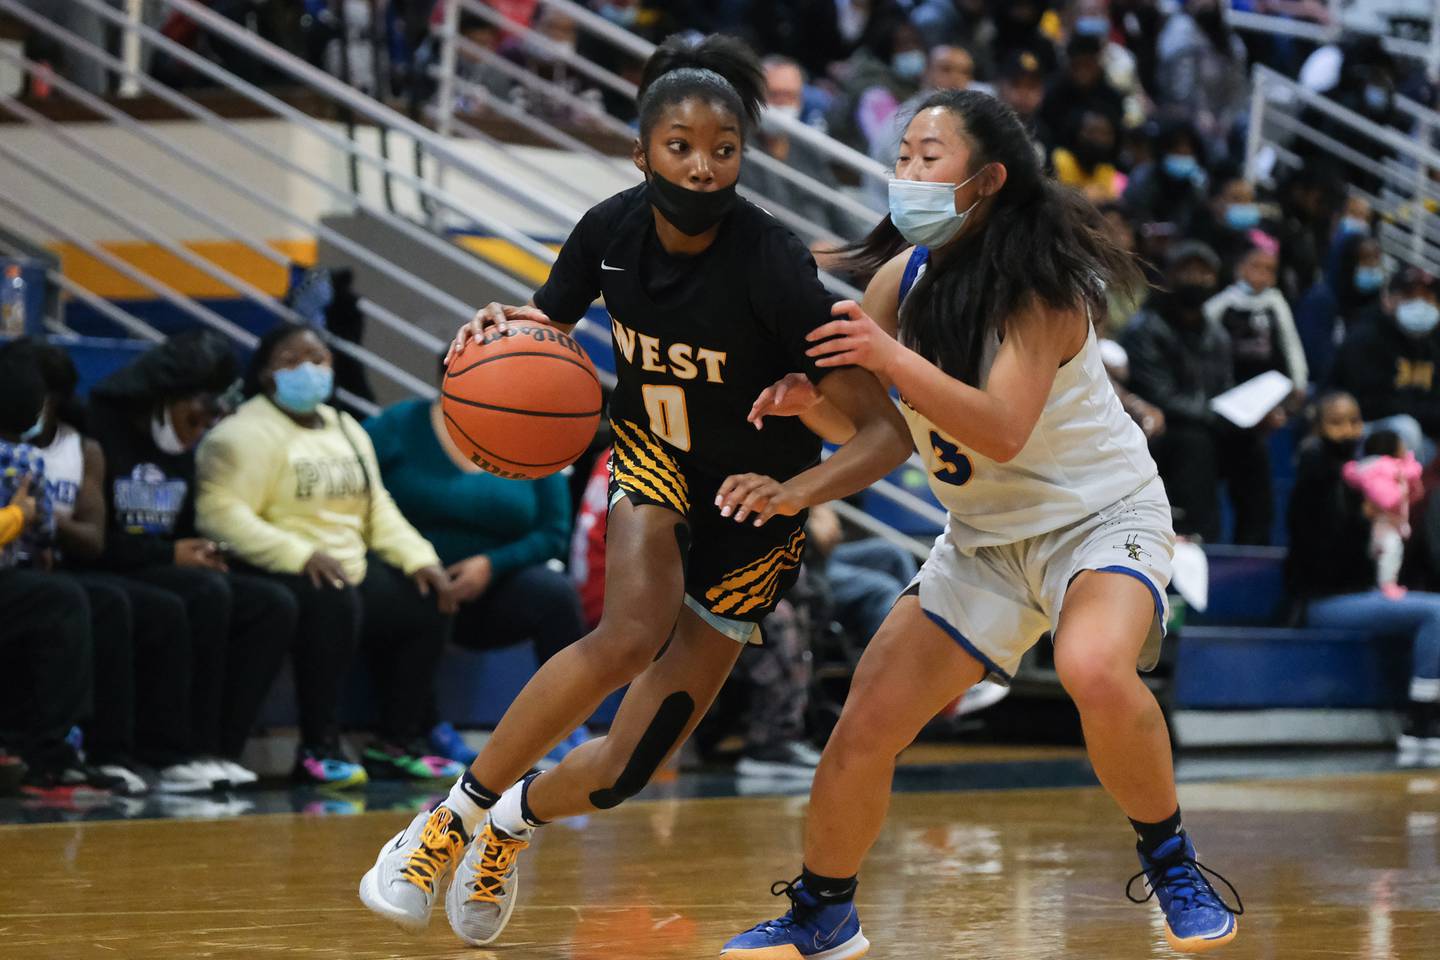 Joliet West's Lisa Thompson makes a move to the baseline against Joliet Central. Friday, Dec. 10, 2021 in Joliet.